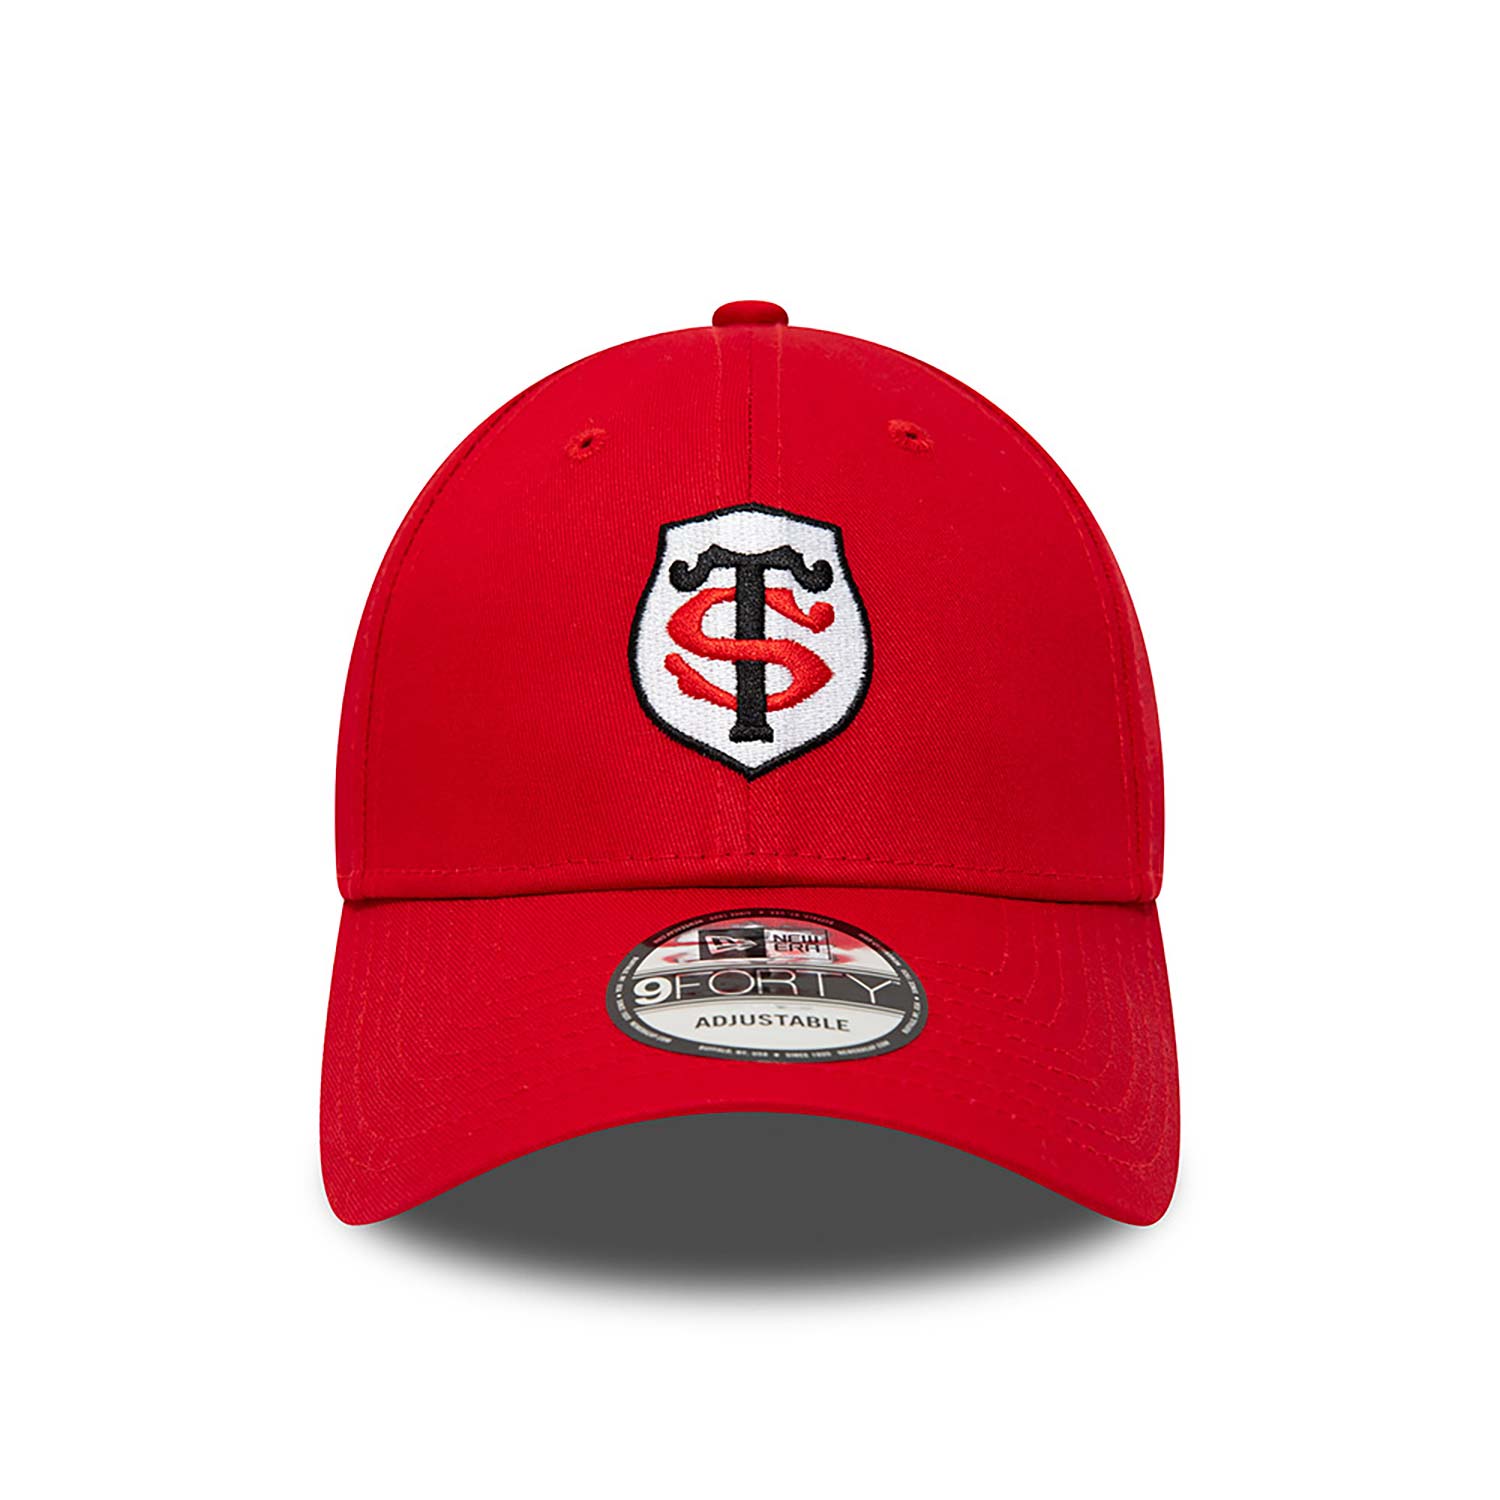 Official New Era Stade Toulousain Team Logo Red 9FORTY Cap B9096_408 ...